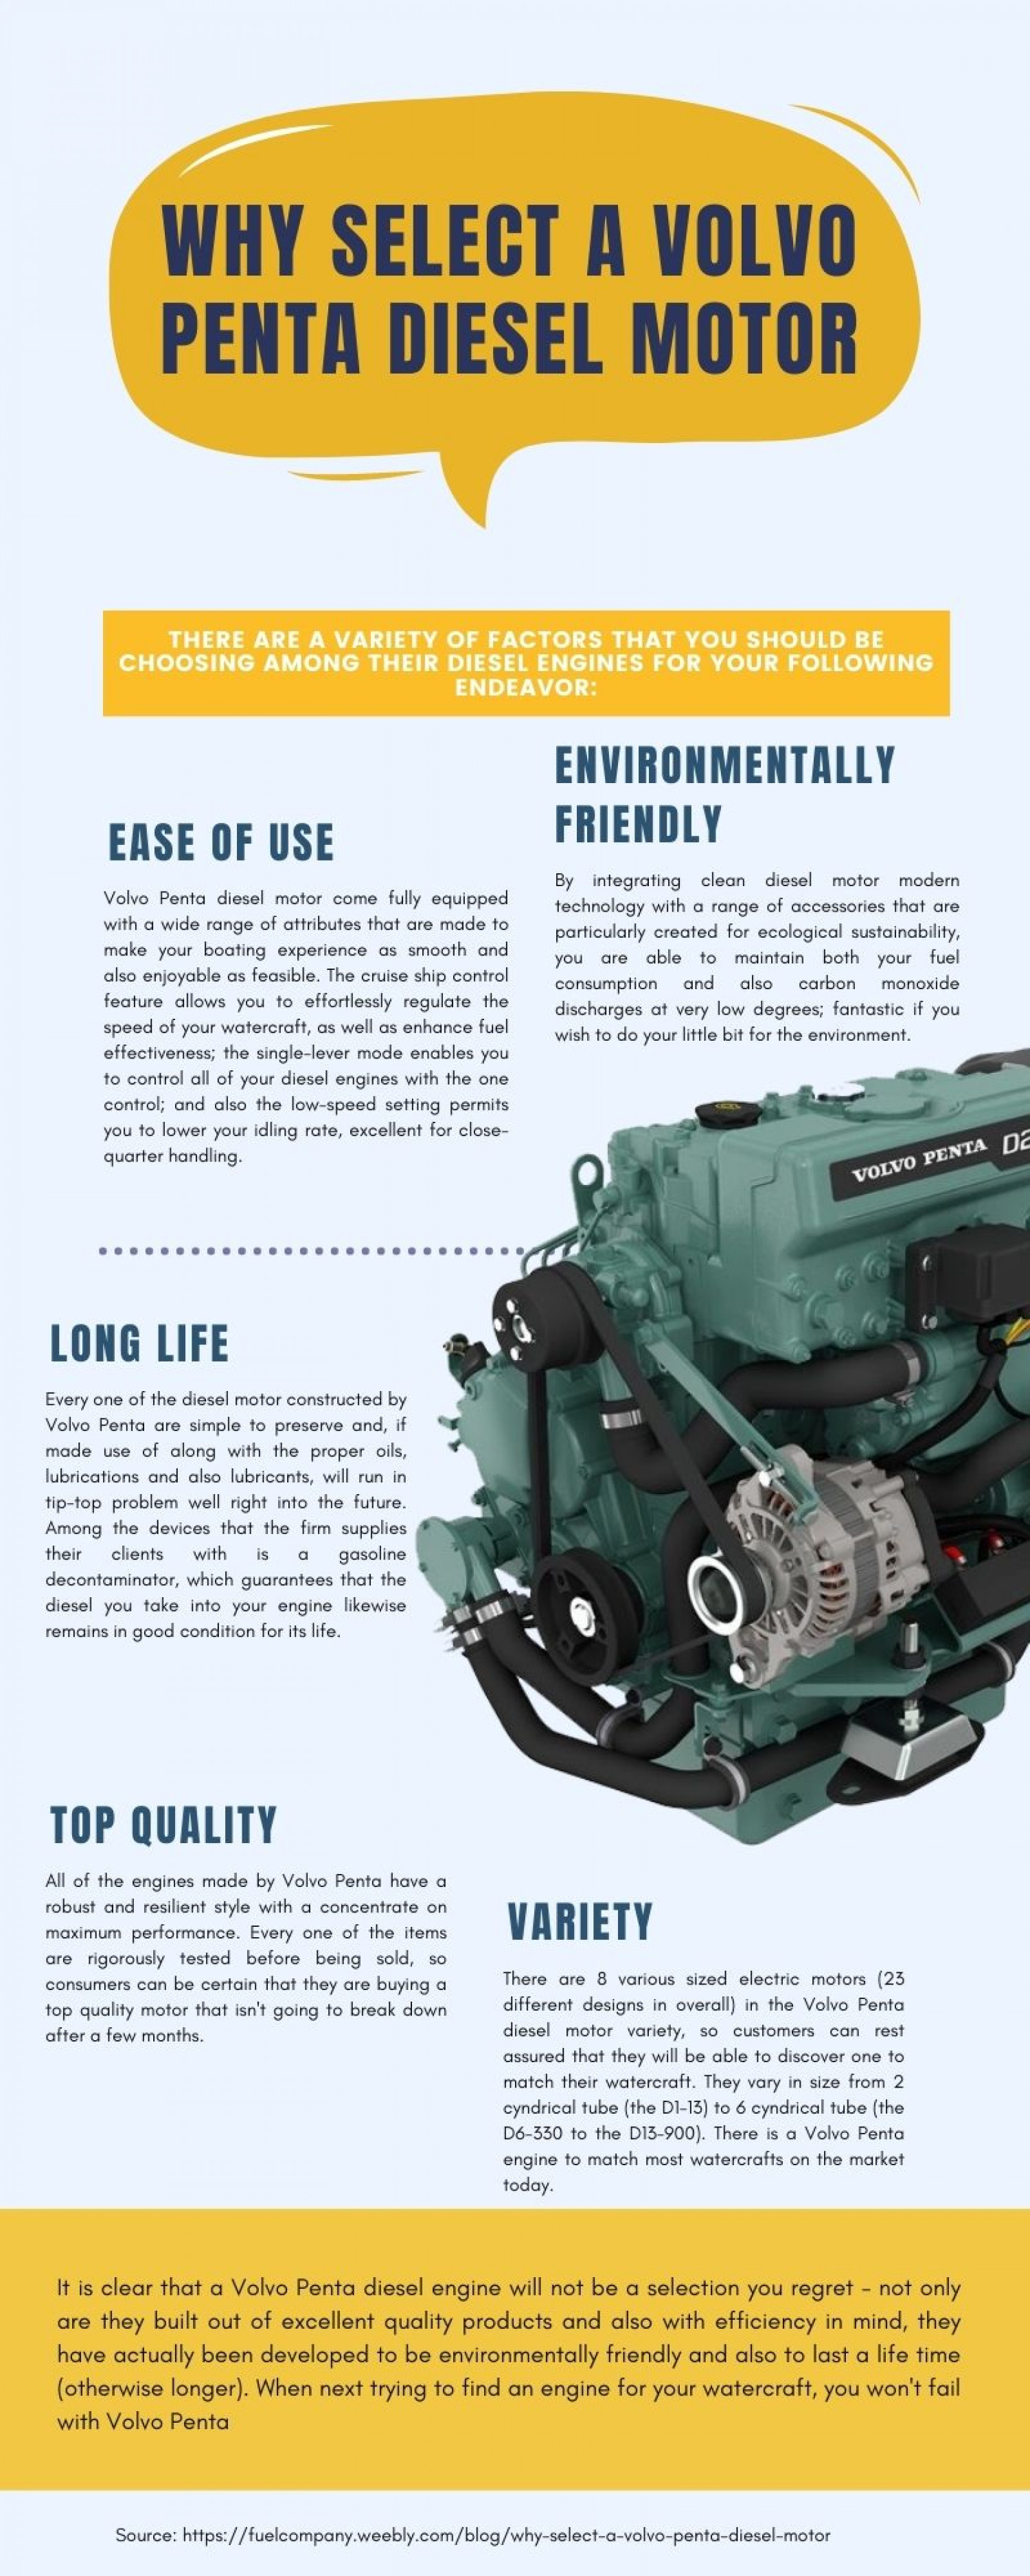 WHY SELECT A VOLVO PENTA DIESEL MOTOR Infographic